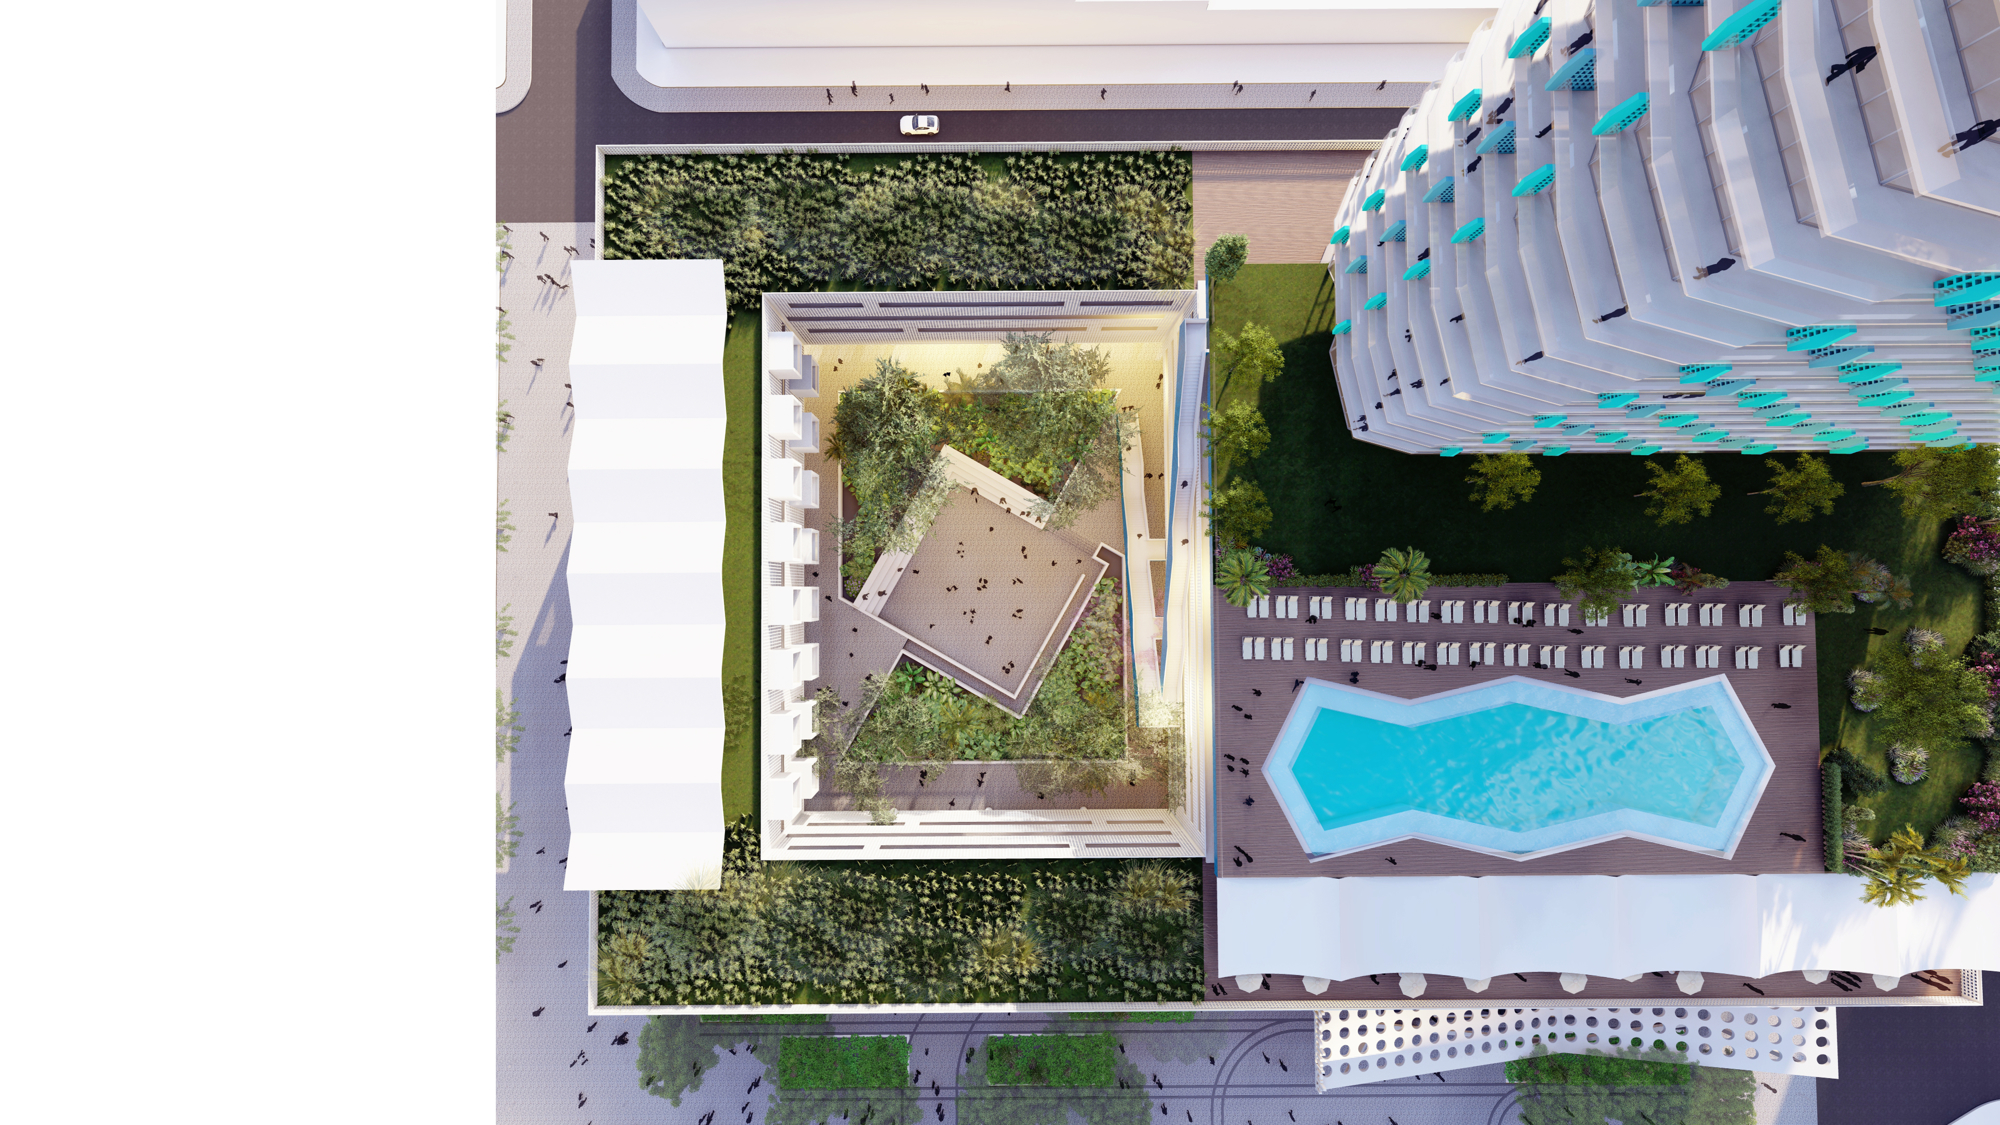 The Carter design shows a rooftop pool and amenity deck.